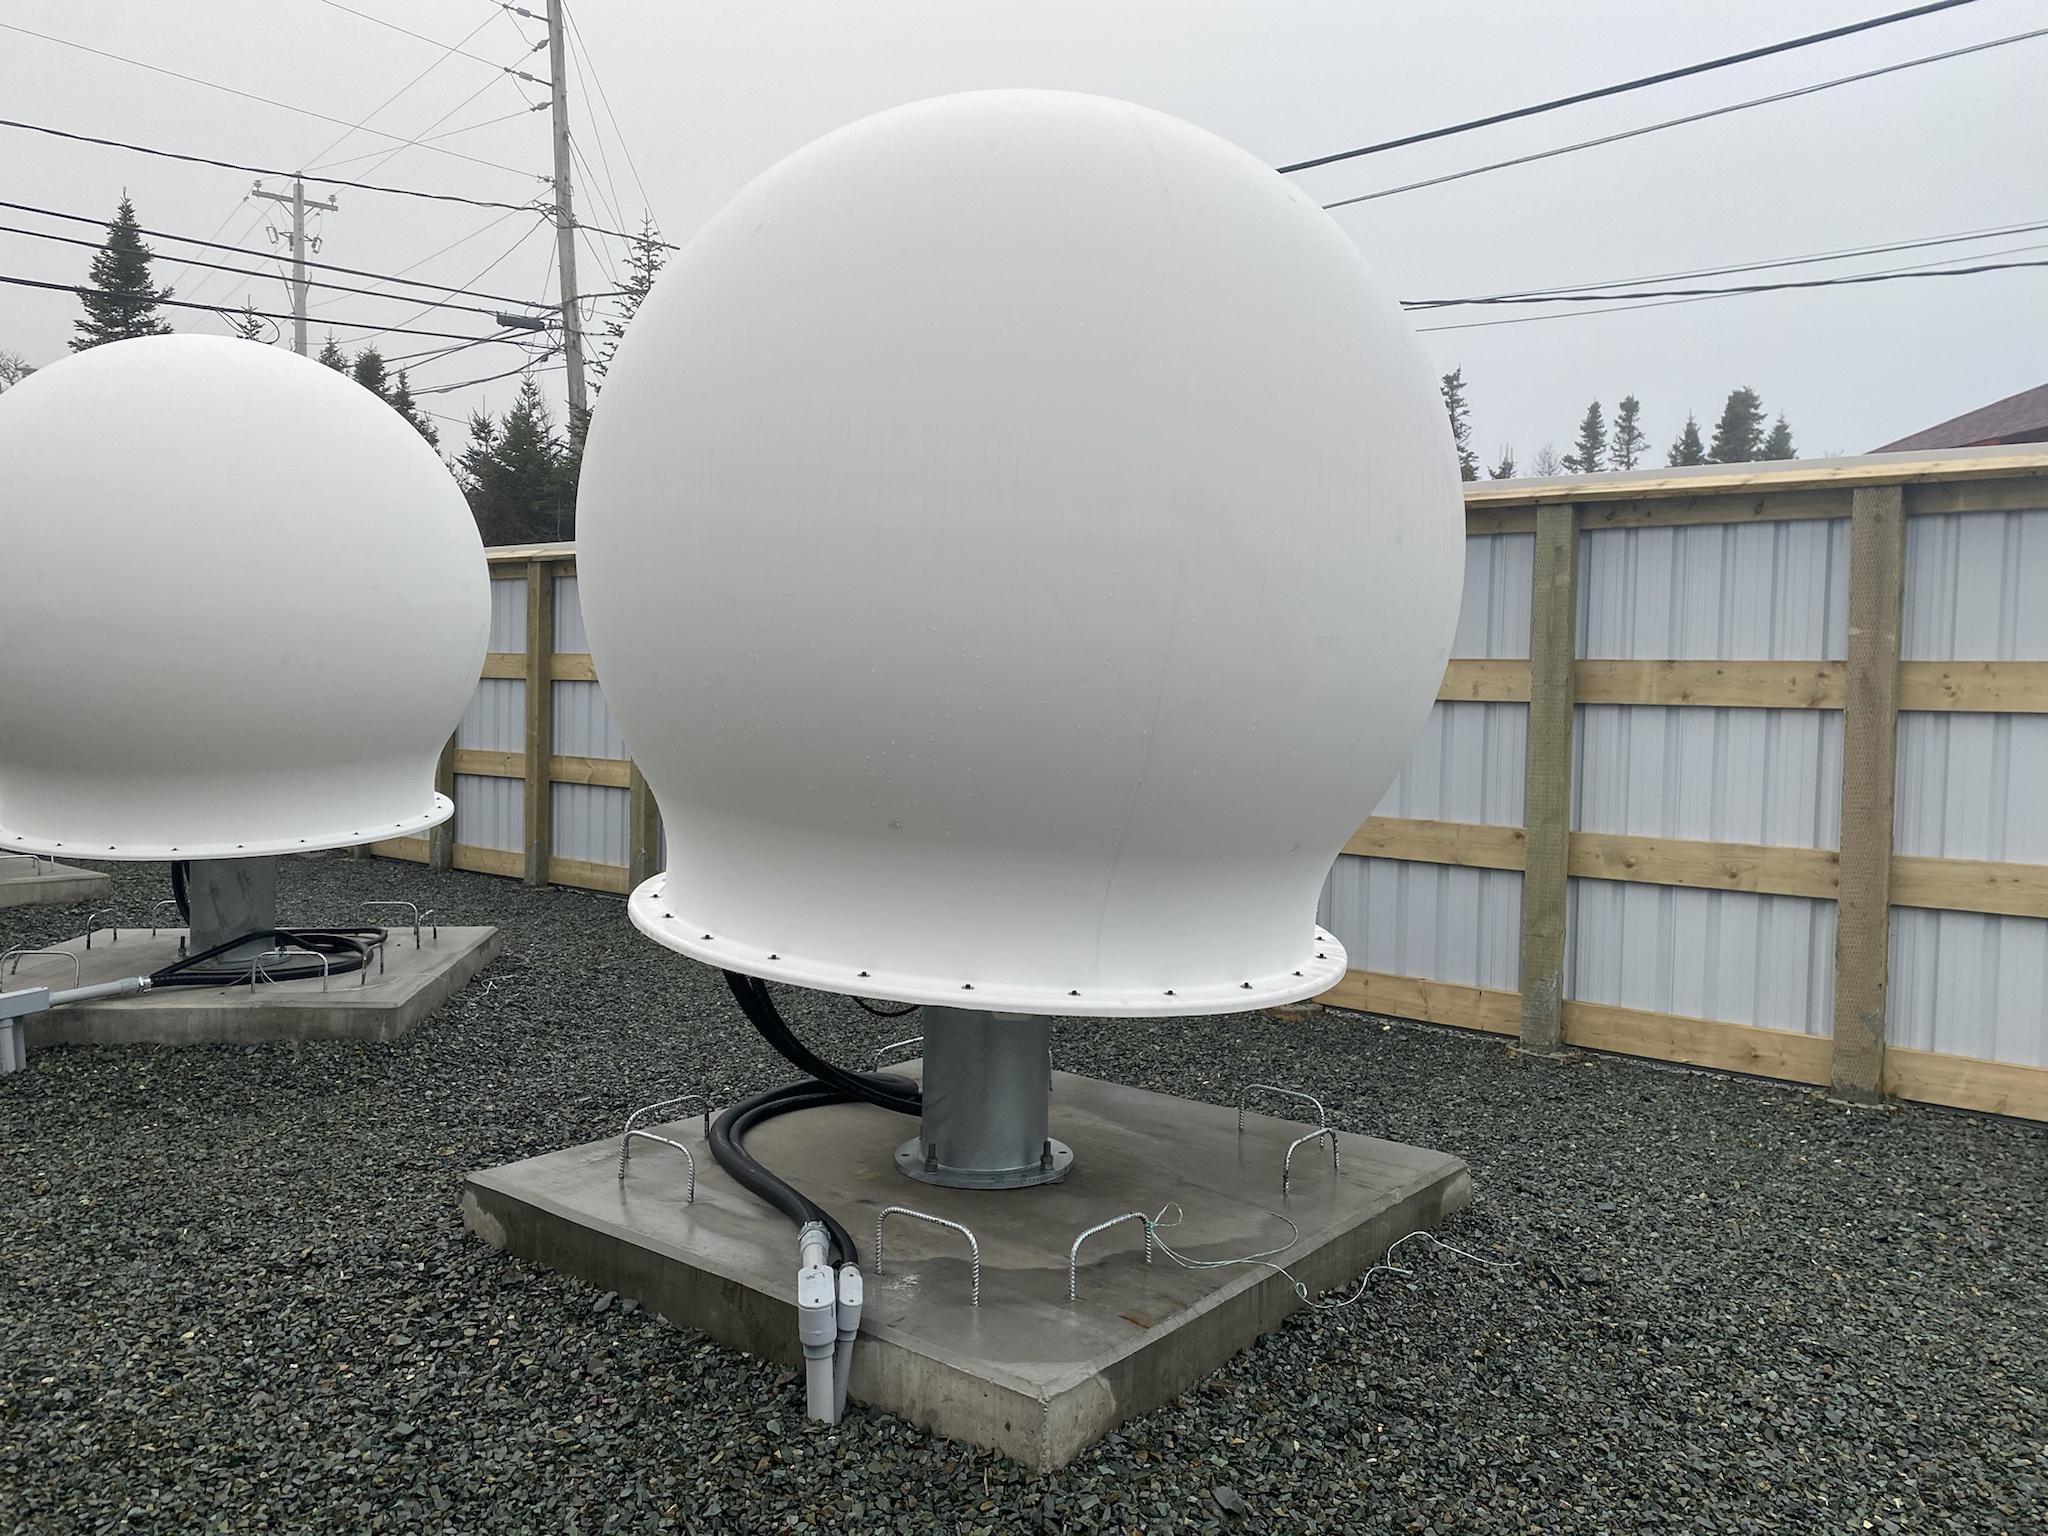 Canada Resident Finds A SpaceX Starlink Ground Station Under Construction [photos]